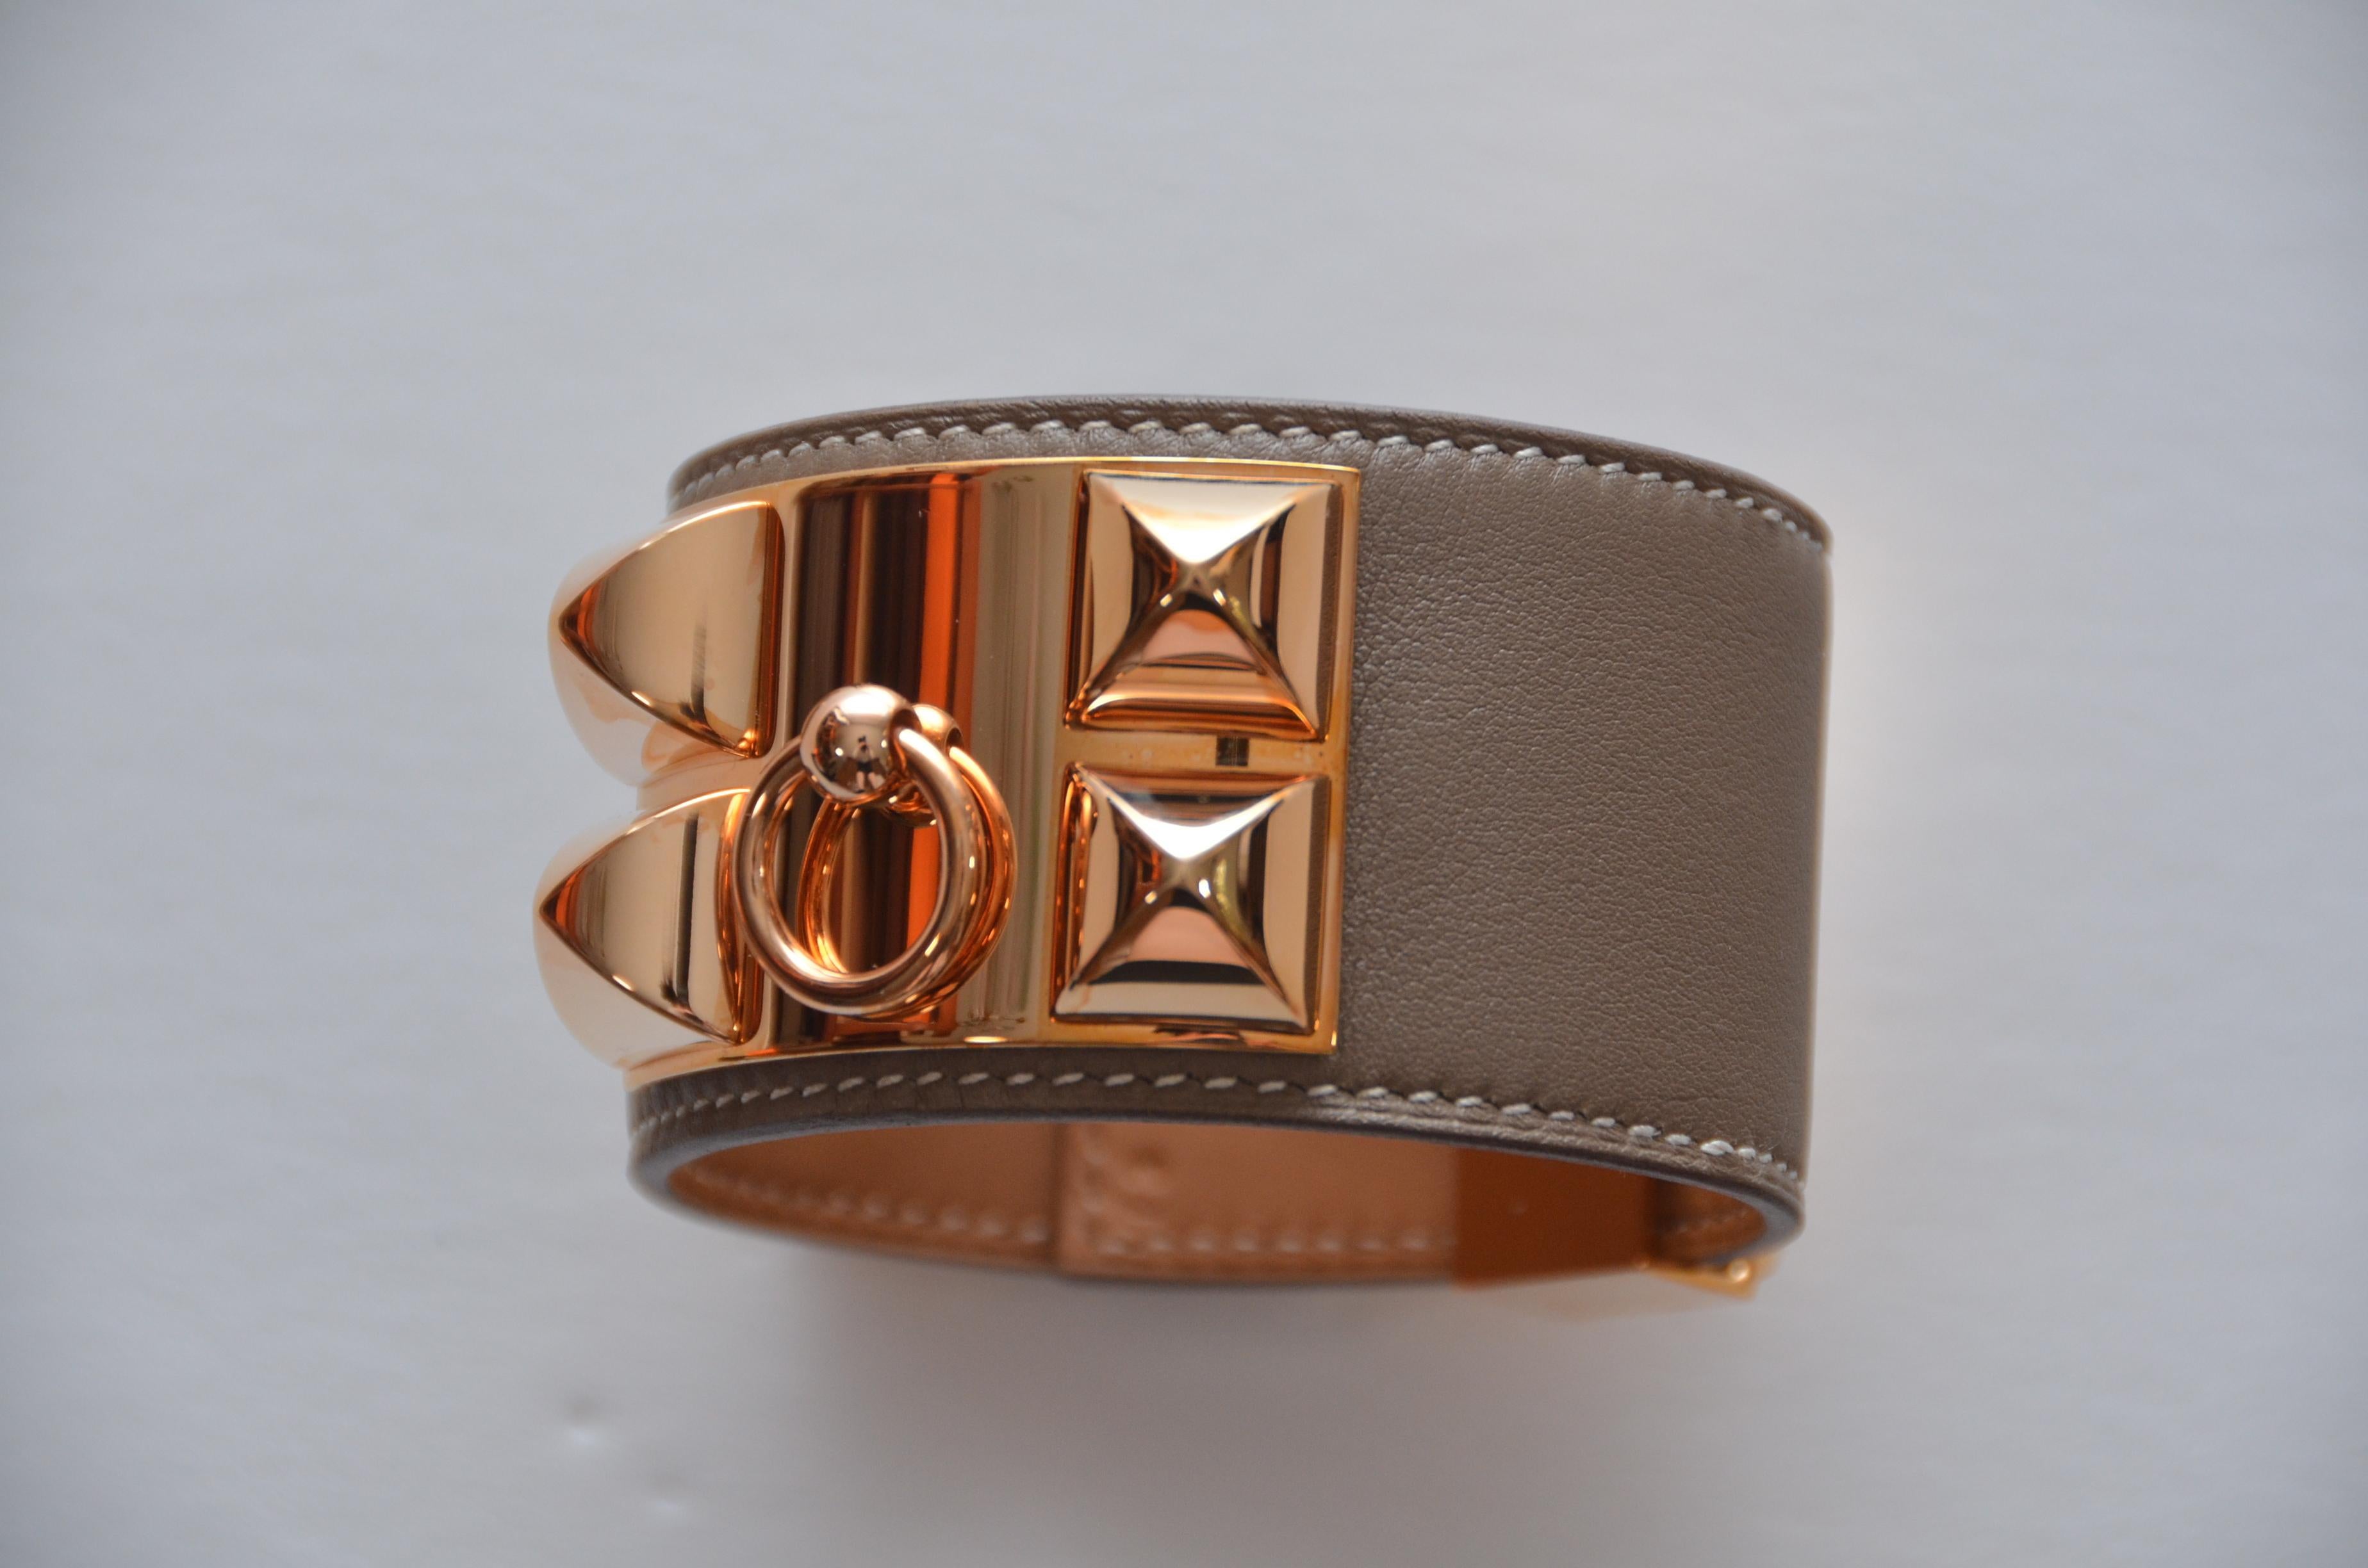 Hermes Collier de Chien Swift CDC Cuff
New never used but it does have minor flaws.
We kept plastic on and it left some flaws on rose gold hardware .Please see pictures.
T3 size
Final sale